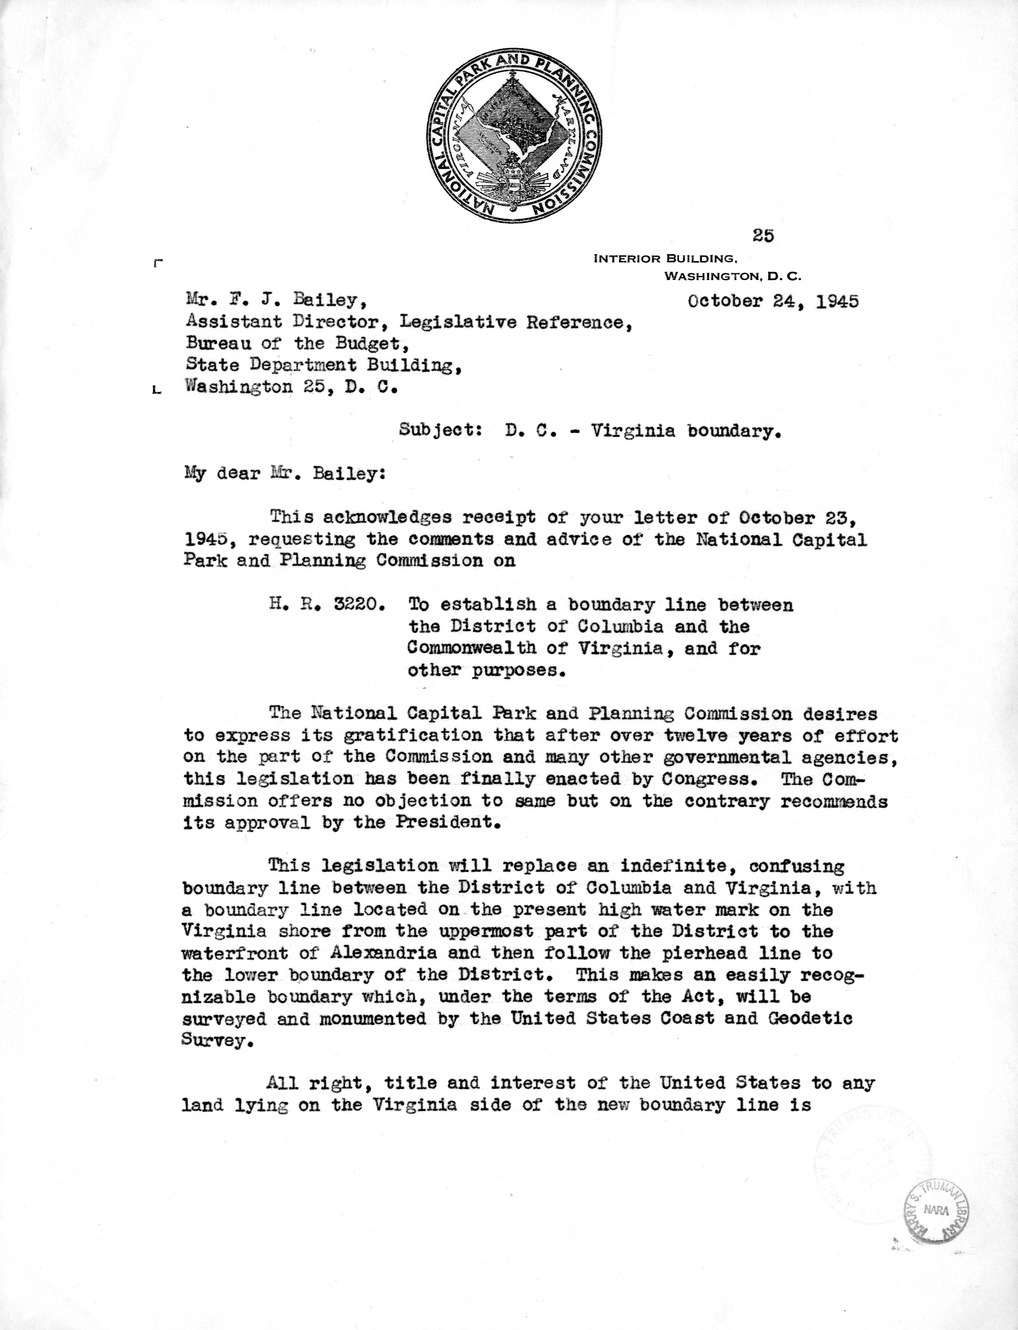 Memorandum from Harold D. Smith to M. C. Latta, H.R. 3220, To Establish a Boundary Line Between the District of Columbia and the Commonwealth of Virginia, with Attachments